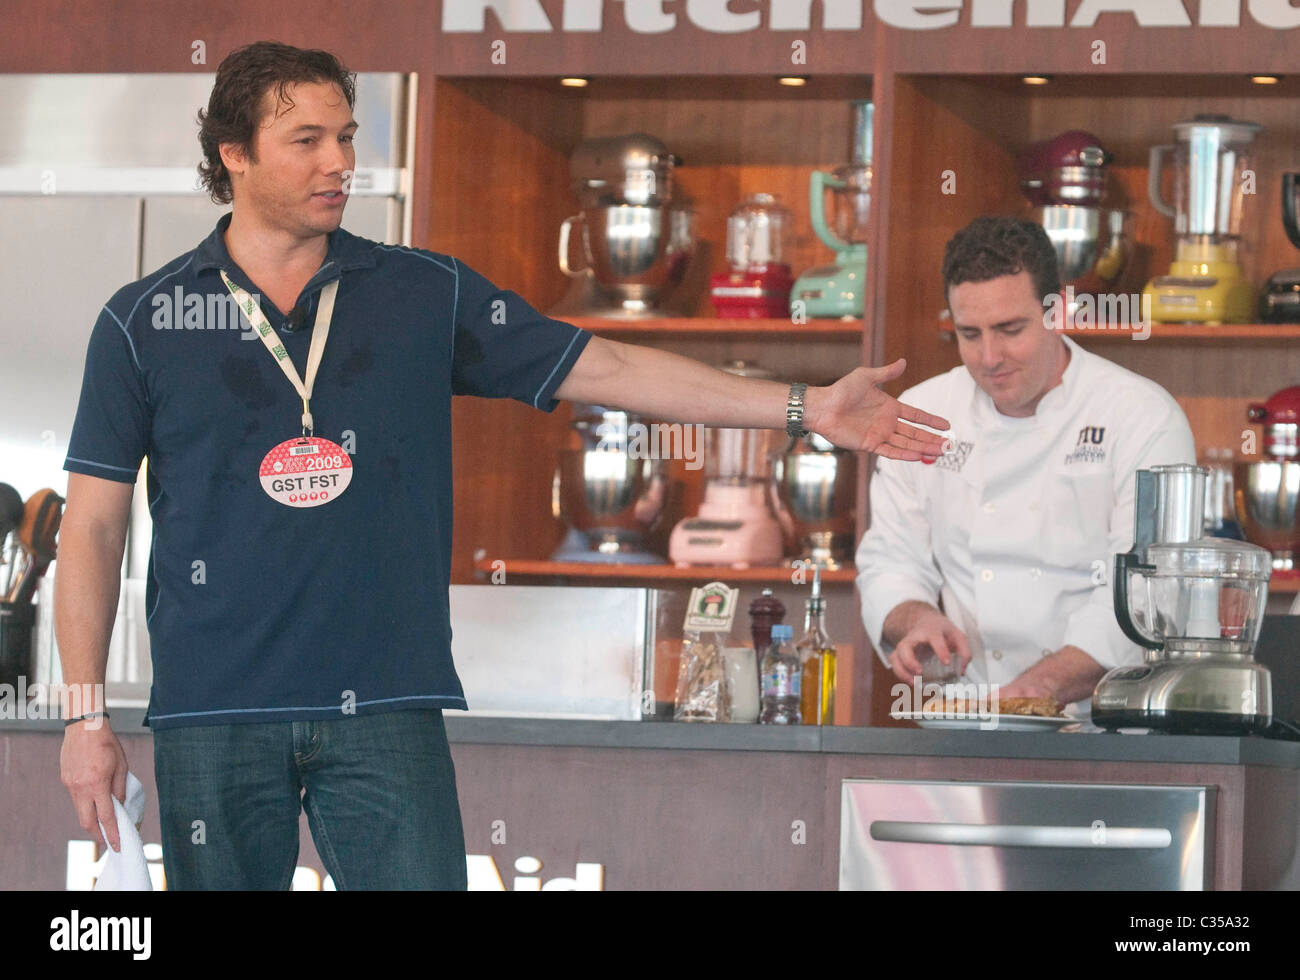 Cooking Personality Rocco DiSpirito gives a cooking demonstration assisted by FIU School of Hospitality student Kevin Purdy Stock Photo